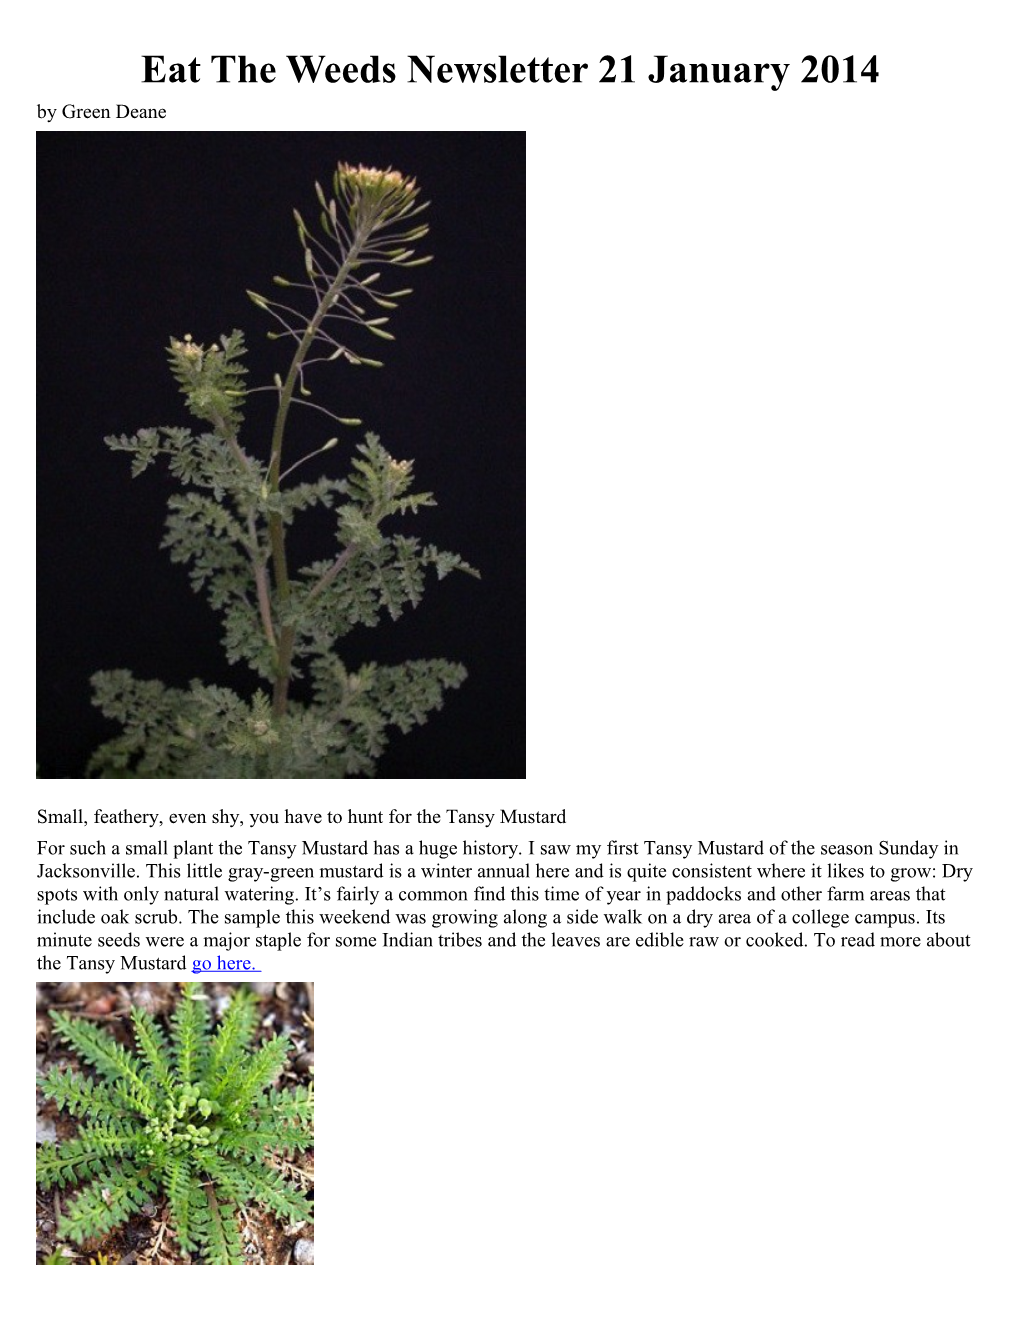 Eat the Weeds Newsletter 21 January 2014